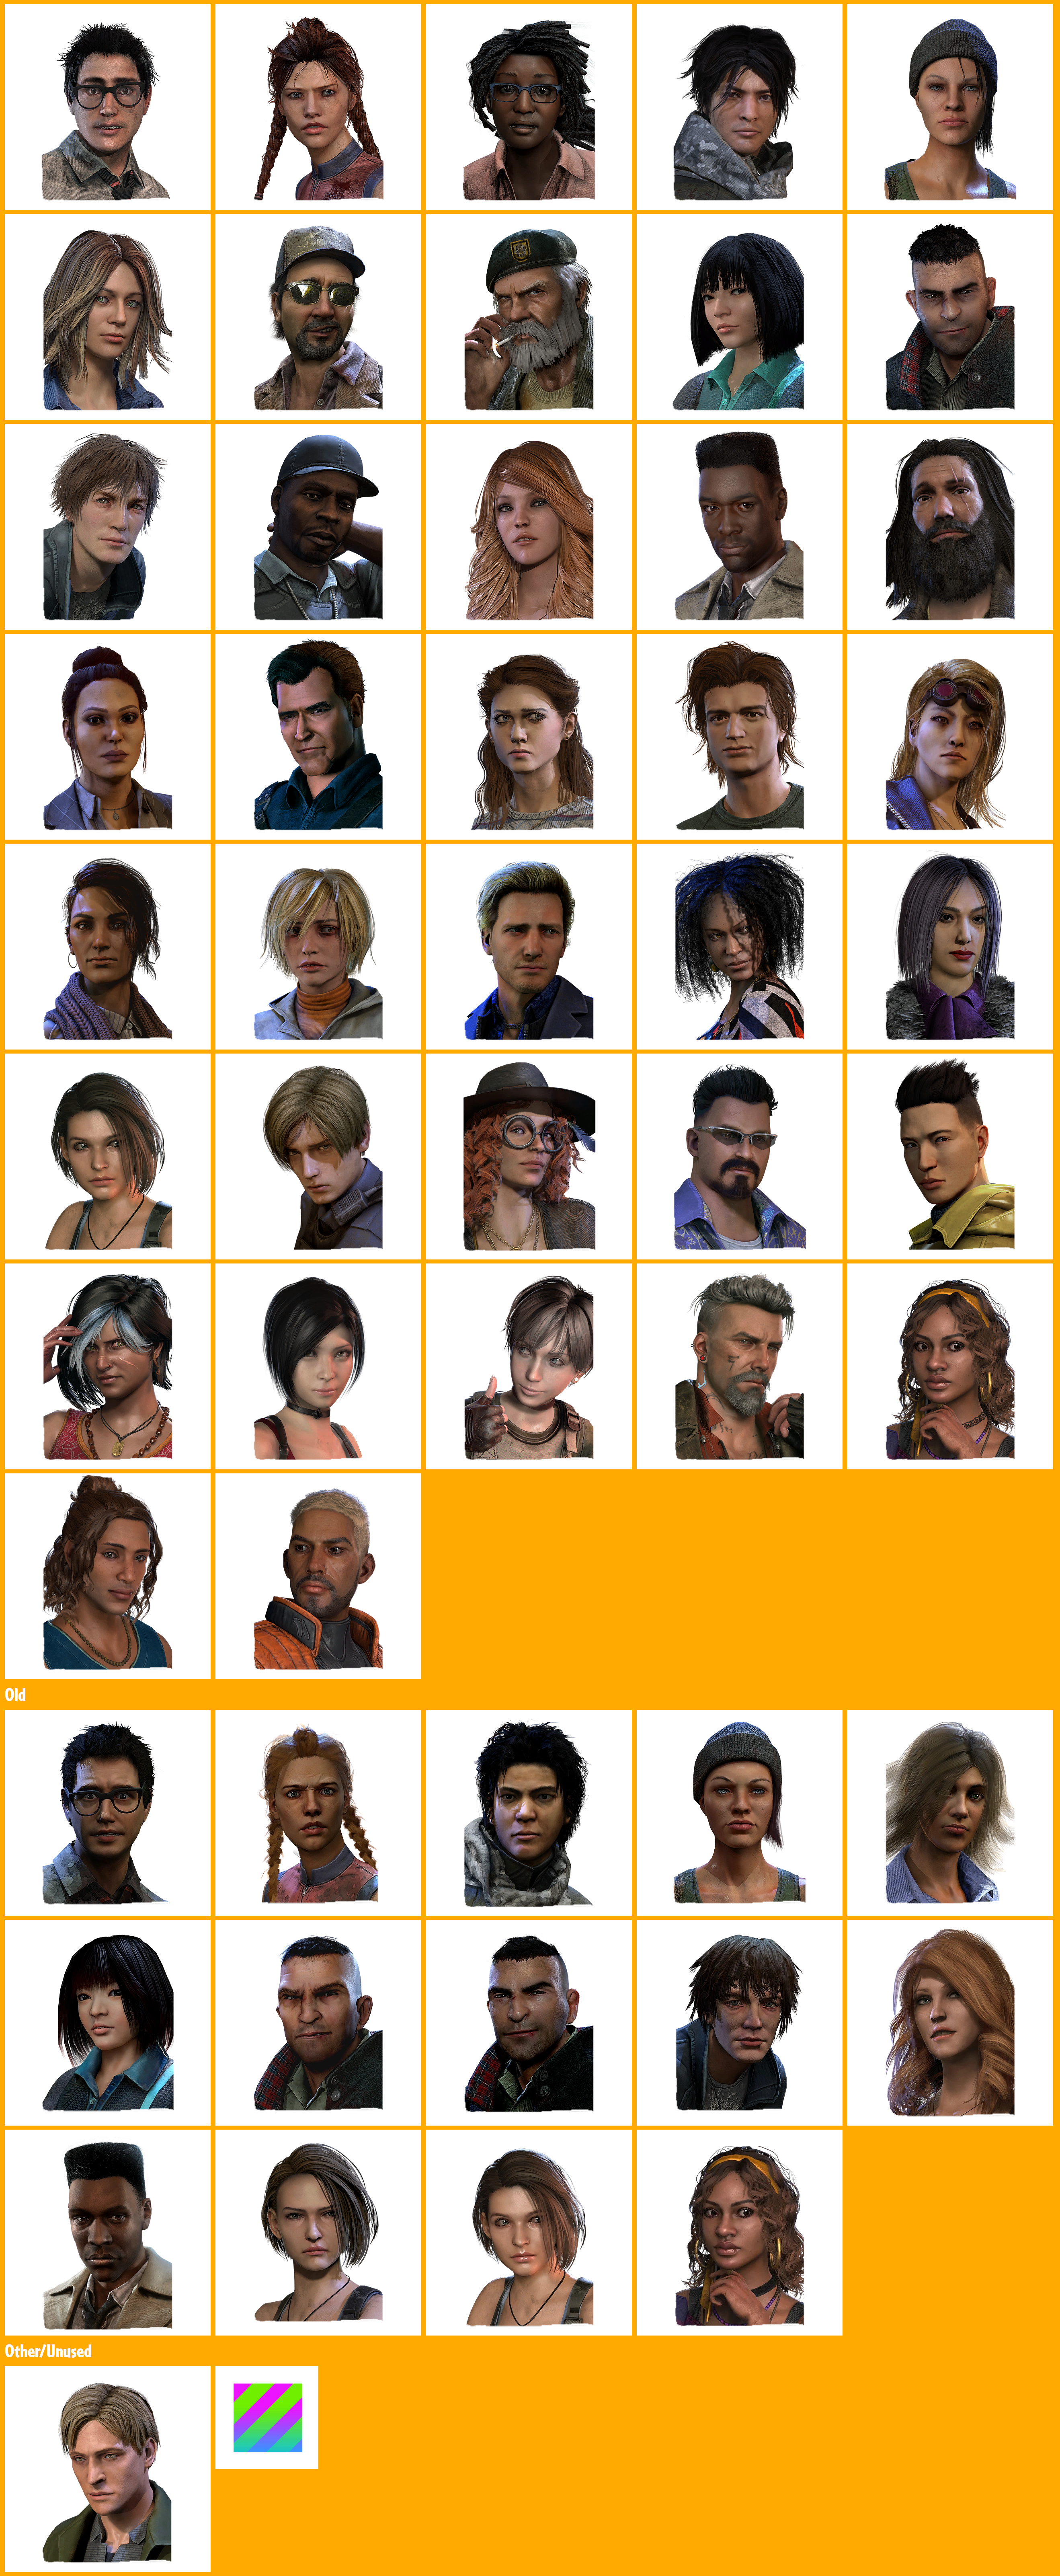 Dead by Daylight - Survivor Portraits (Old)